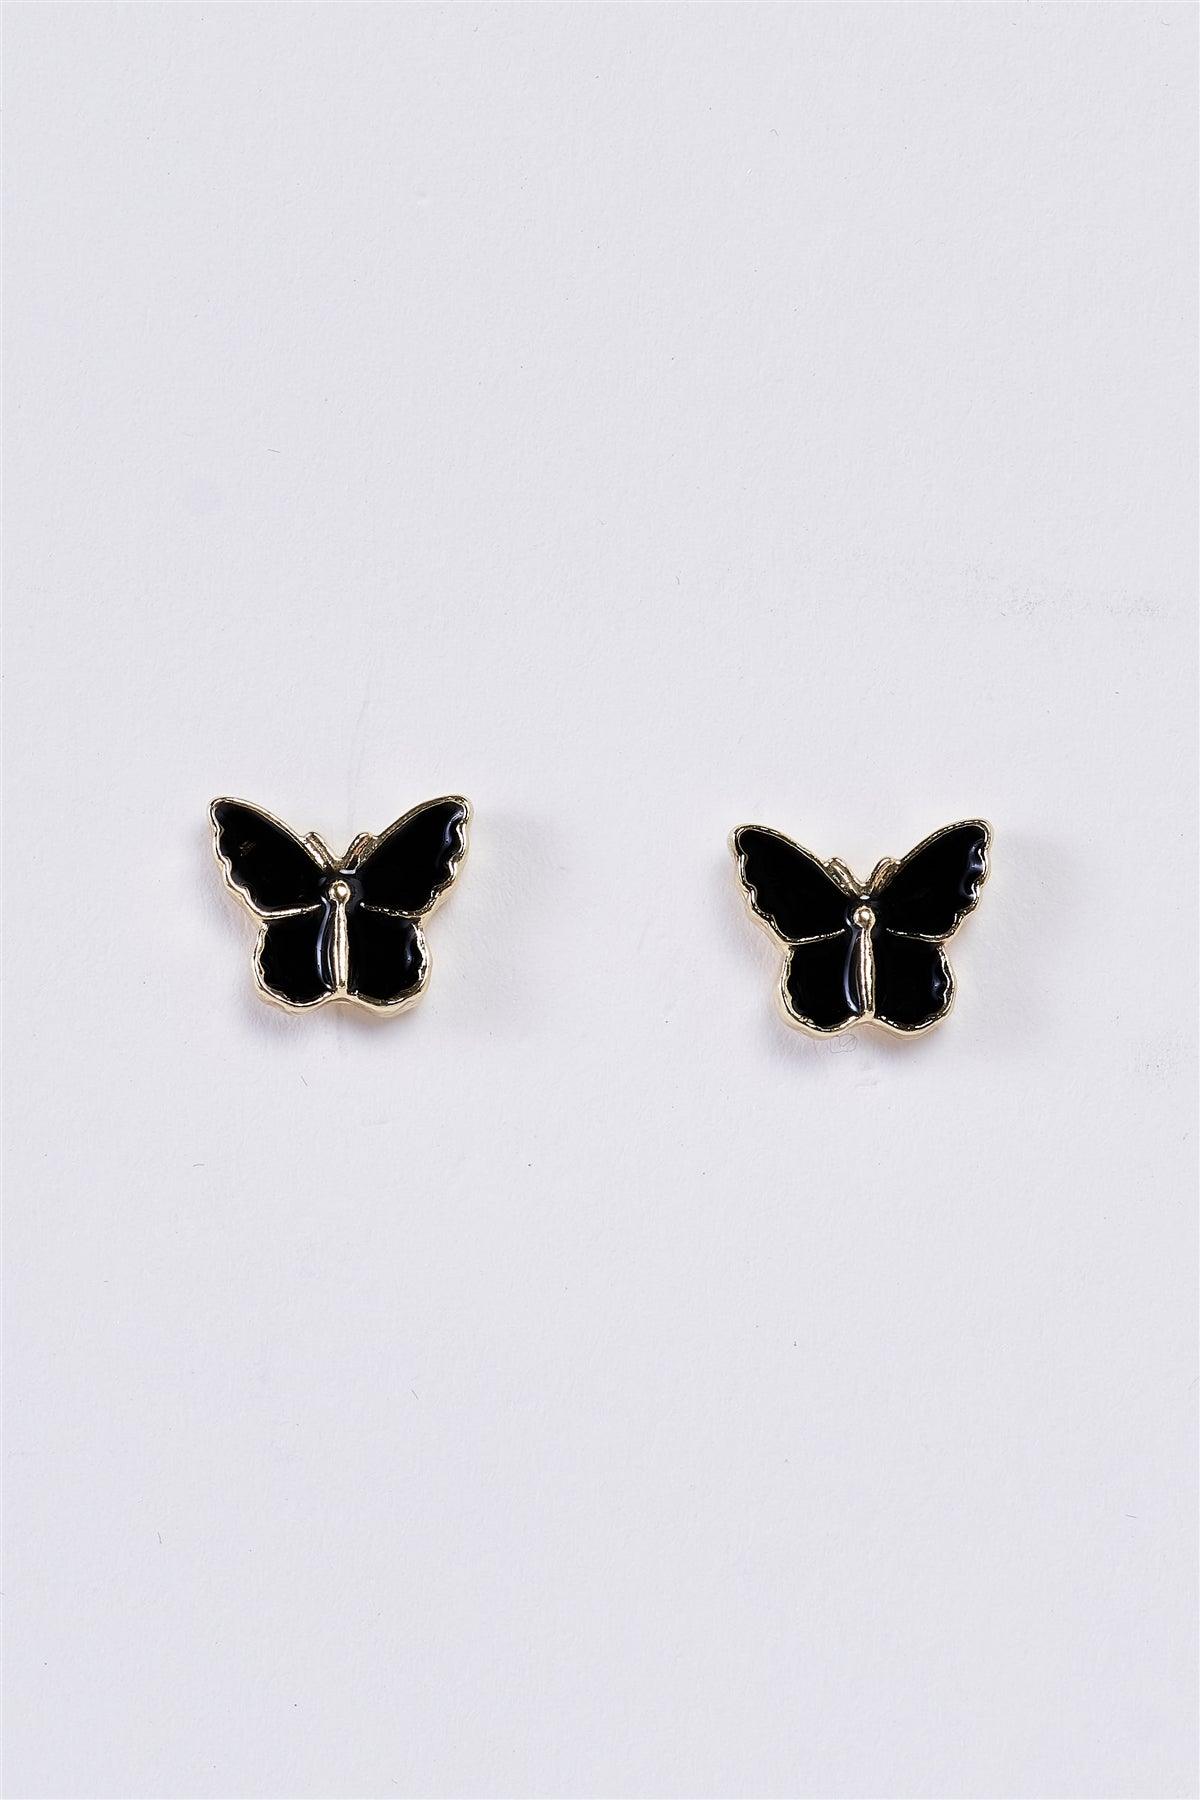 Gold & Black Butterfly Shaped Stud Earrings /3 Pairs